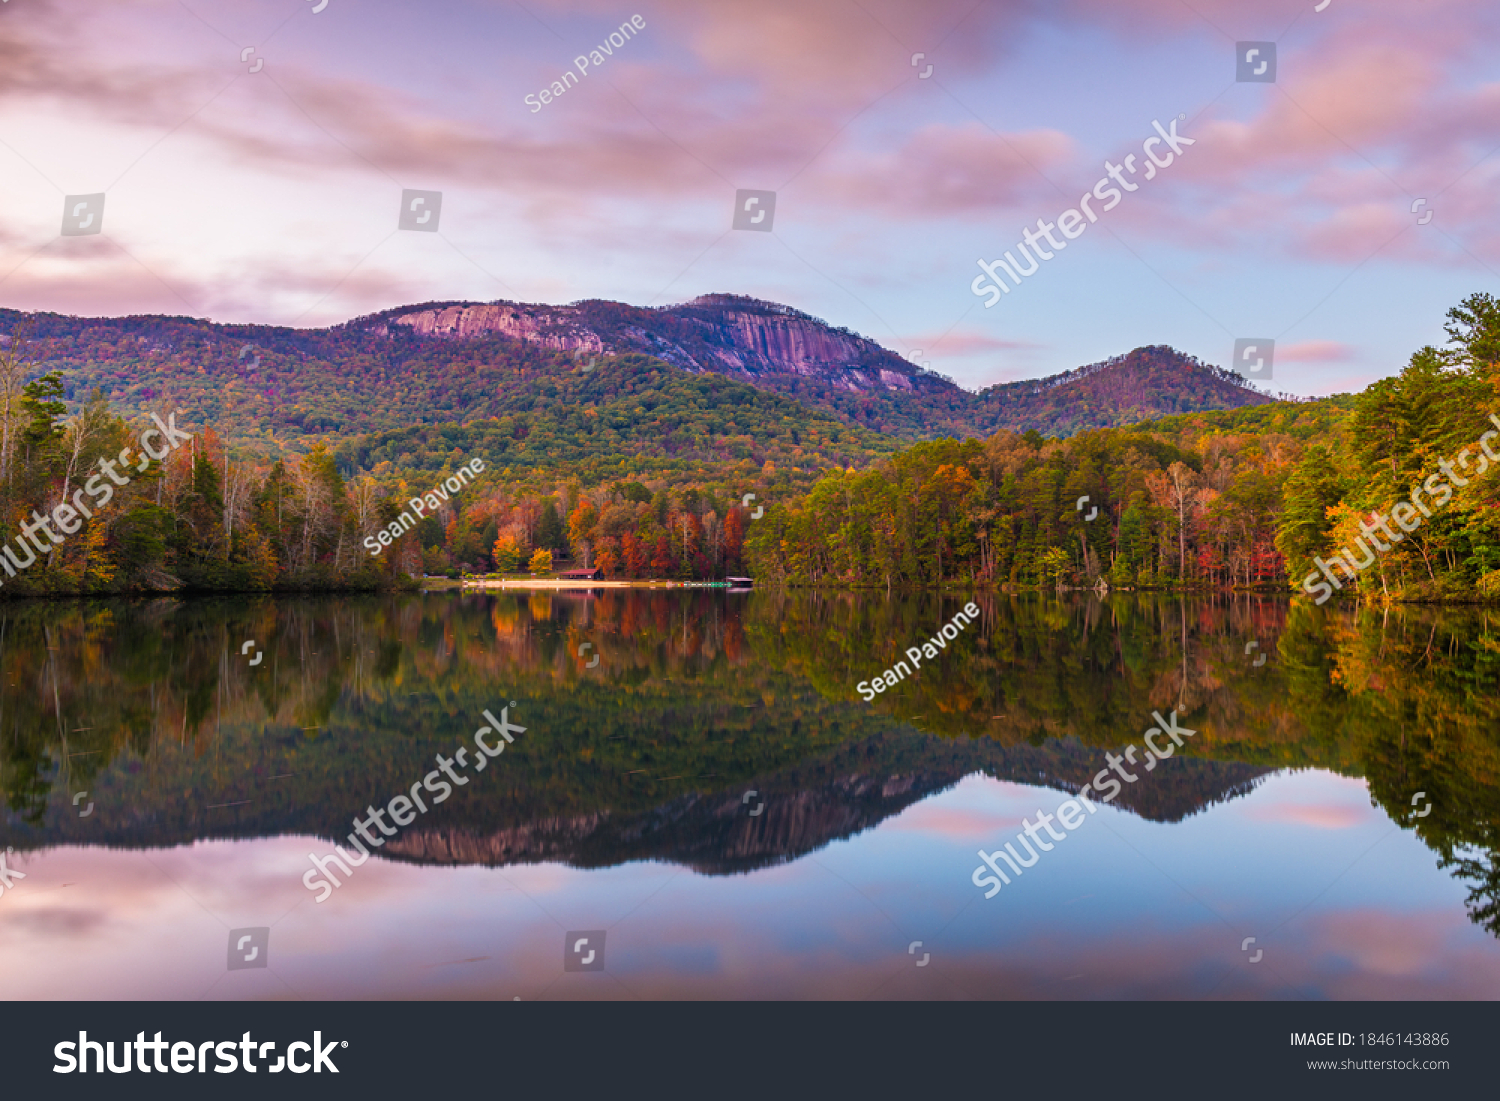 98 Pickens County Images Stock Photos Vectors Shutterstock